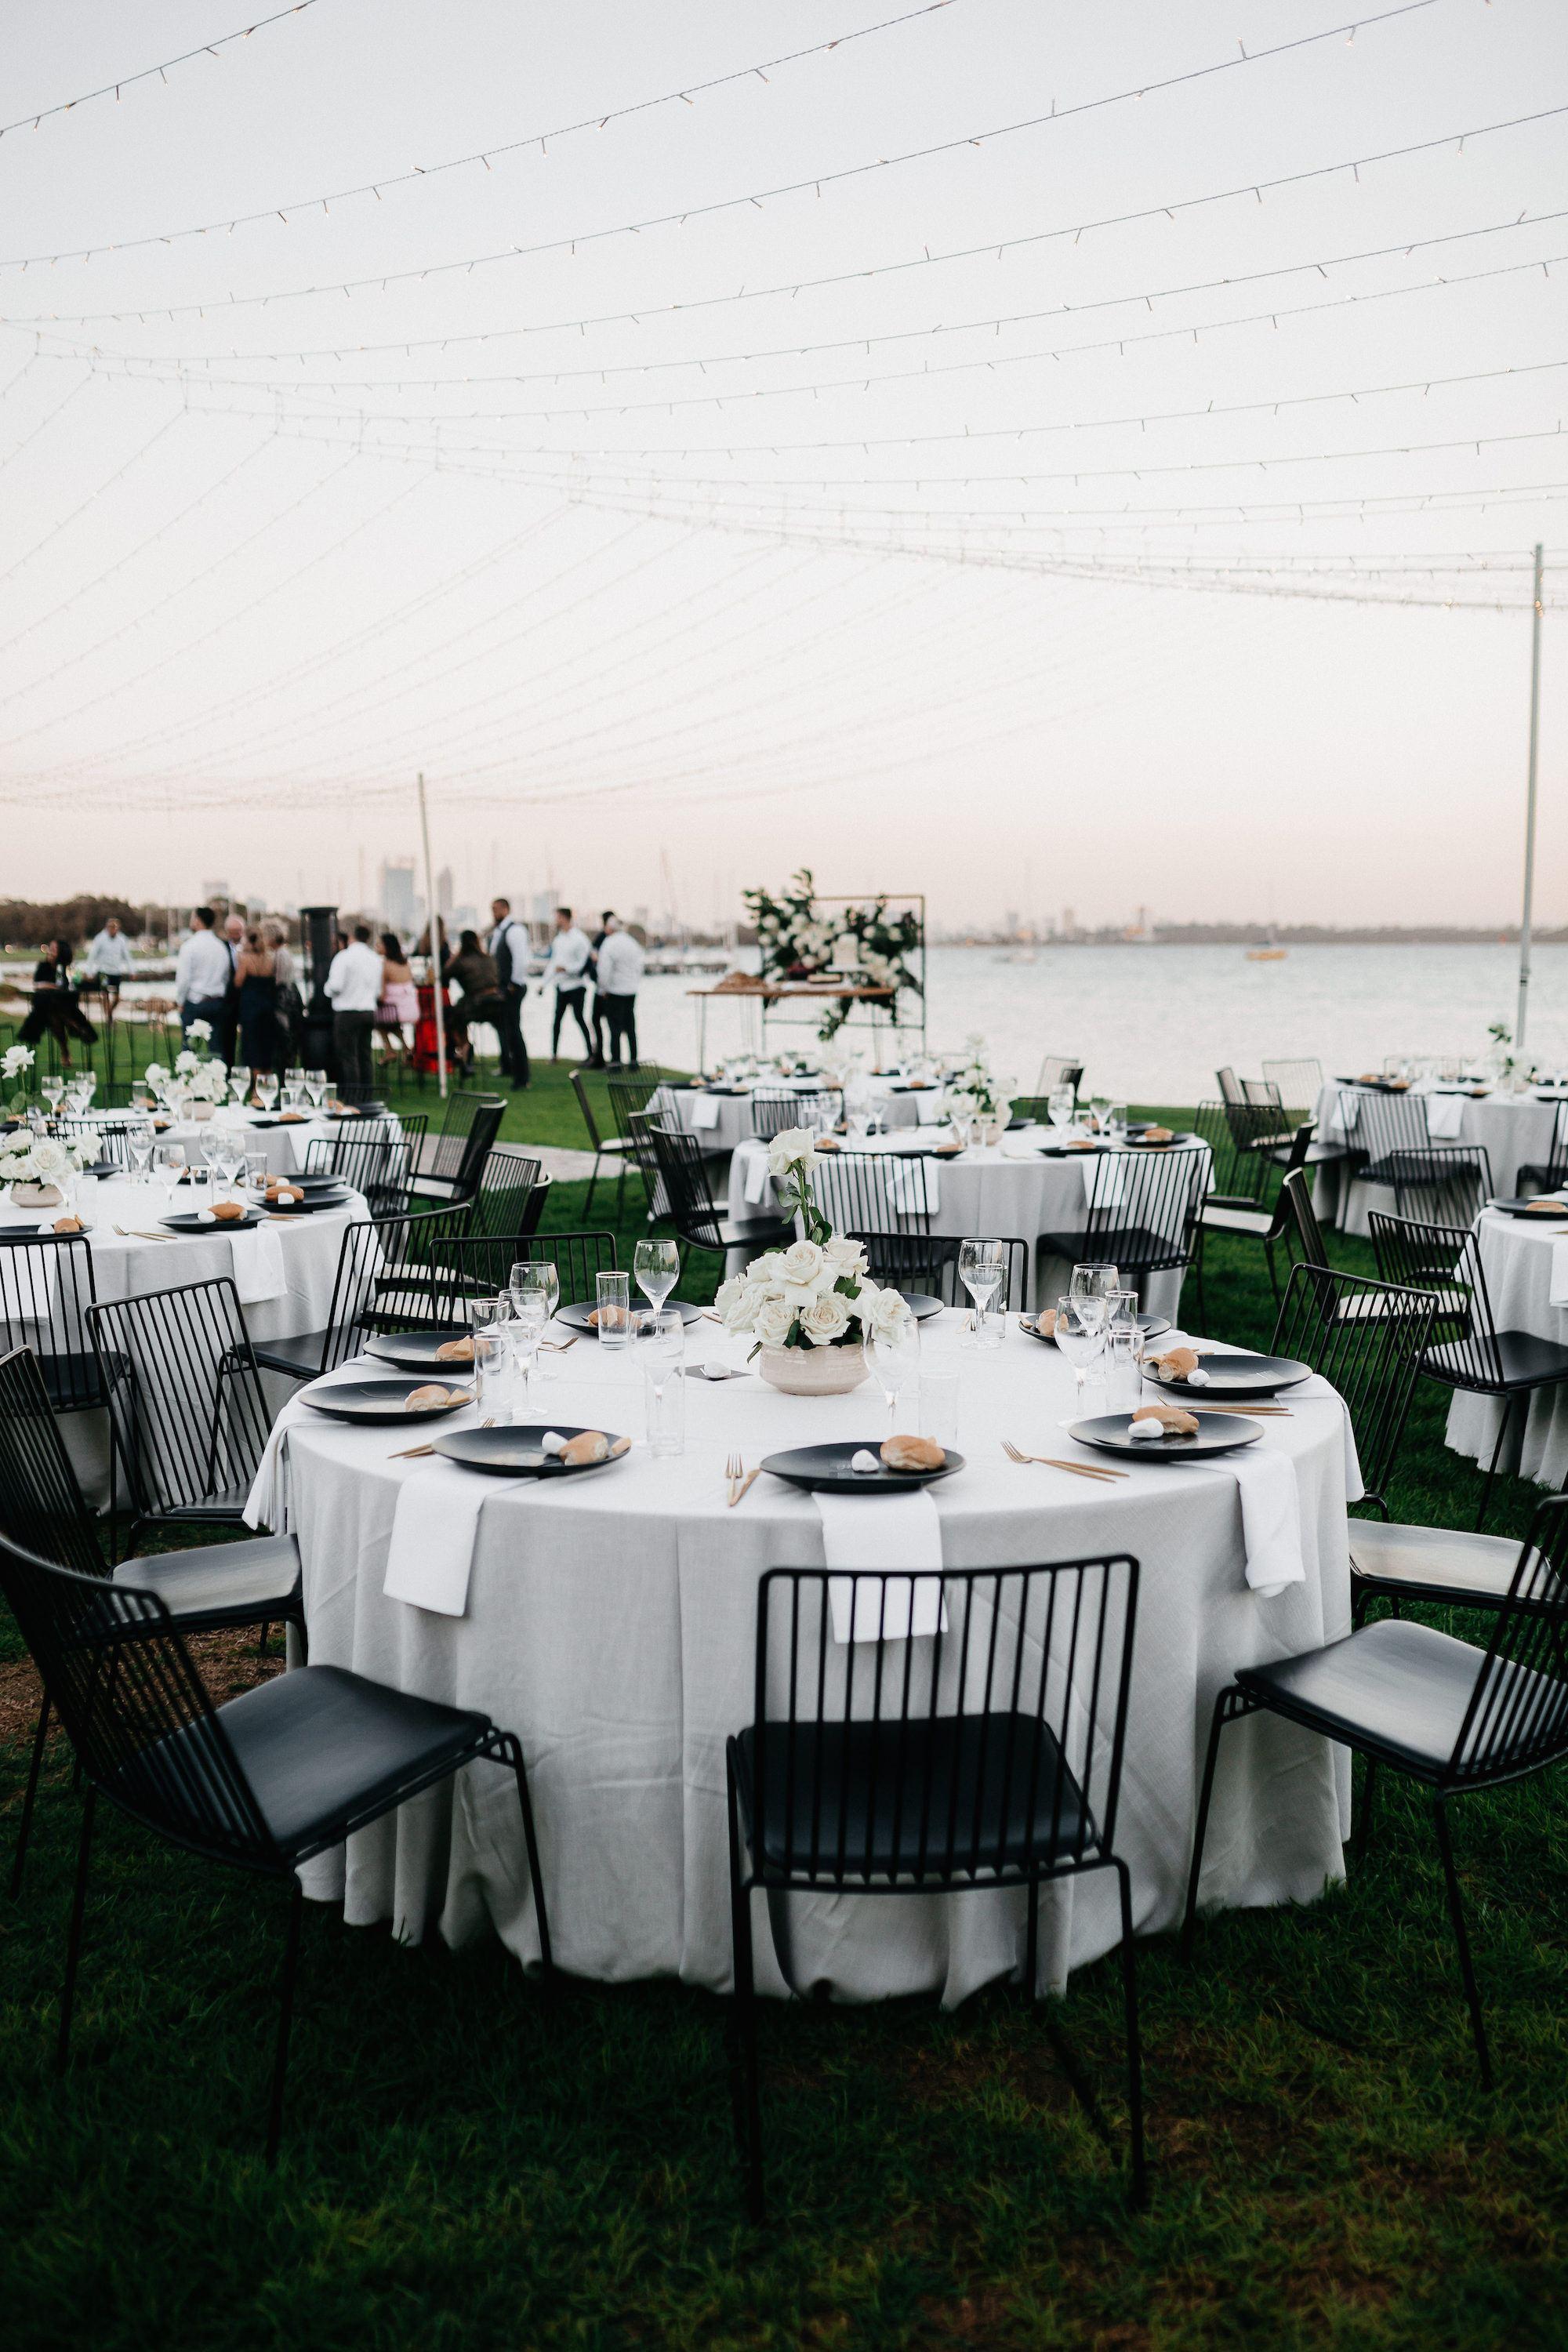 Beautiful white table setting at outdoor wedding in Perth, WA